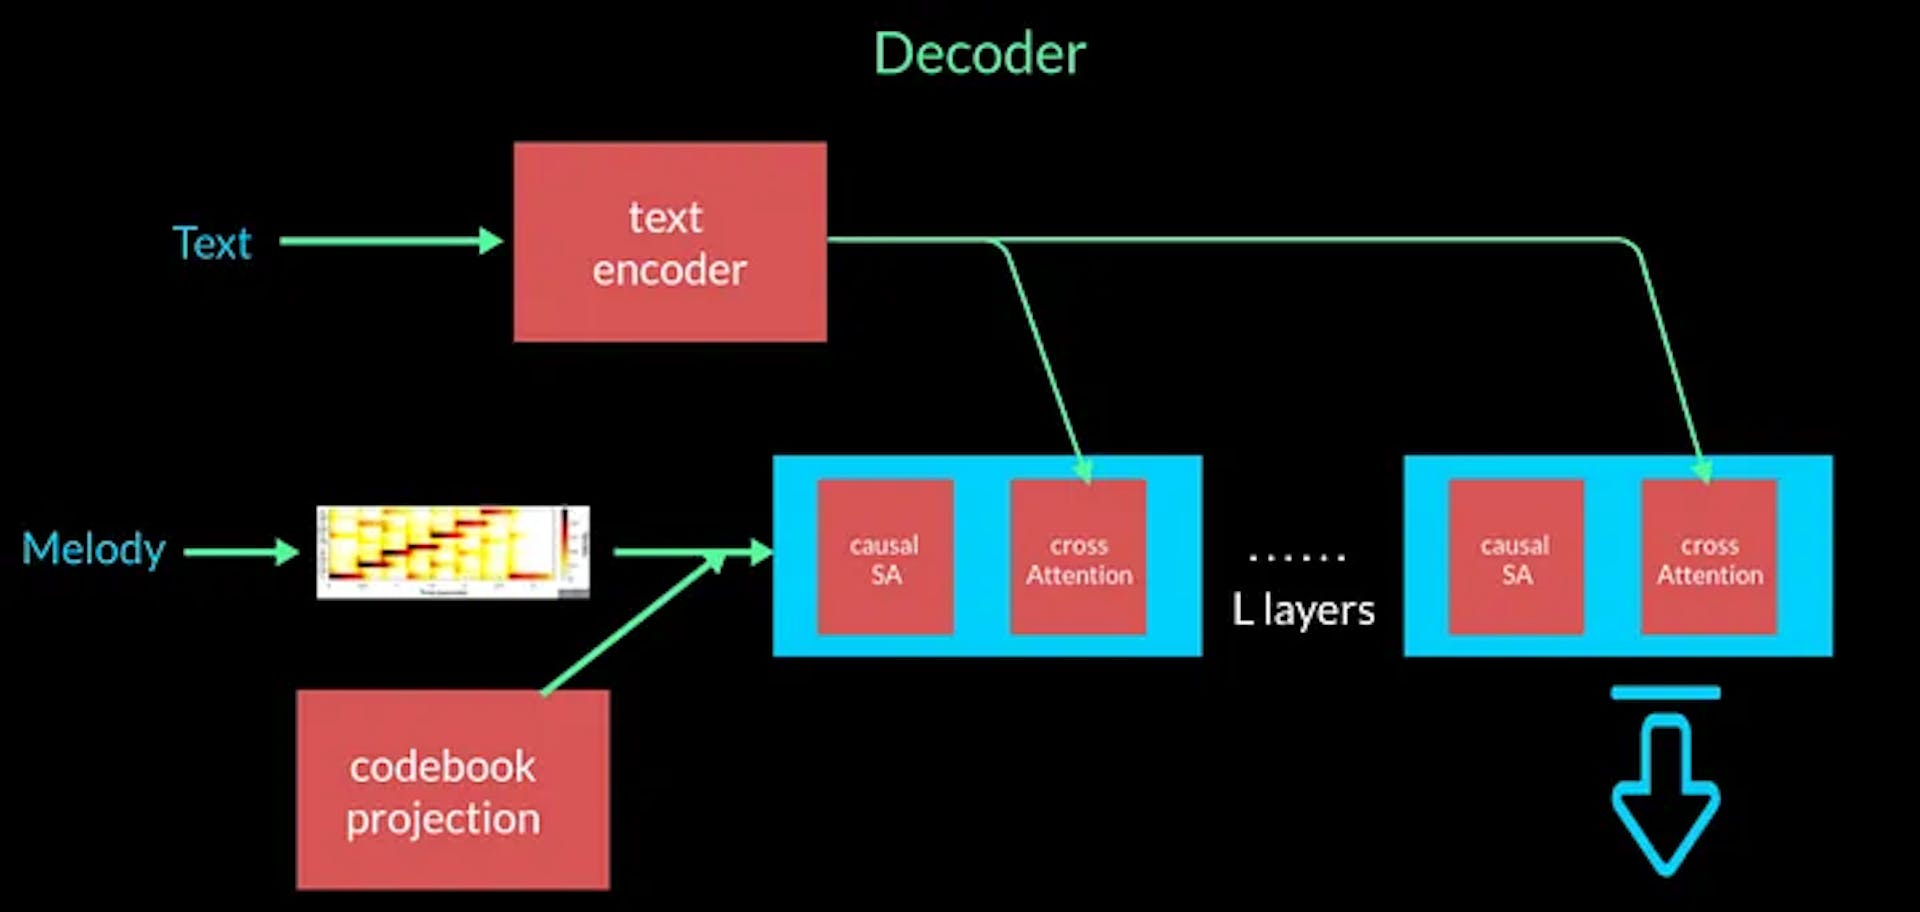 The decoder architecture which takes the conditionings (text or melody) along with the condebook pattern outputs into the decoder which is a modified transformer decoder architecture